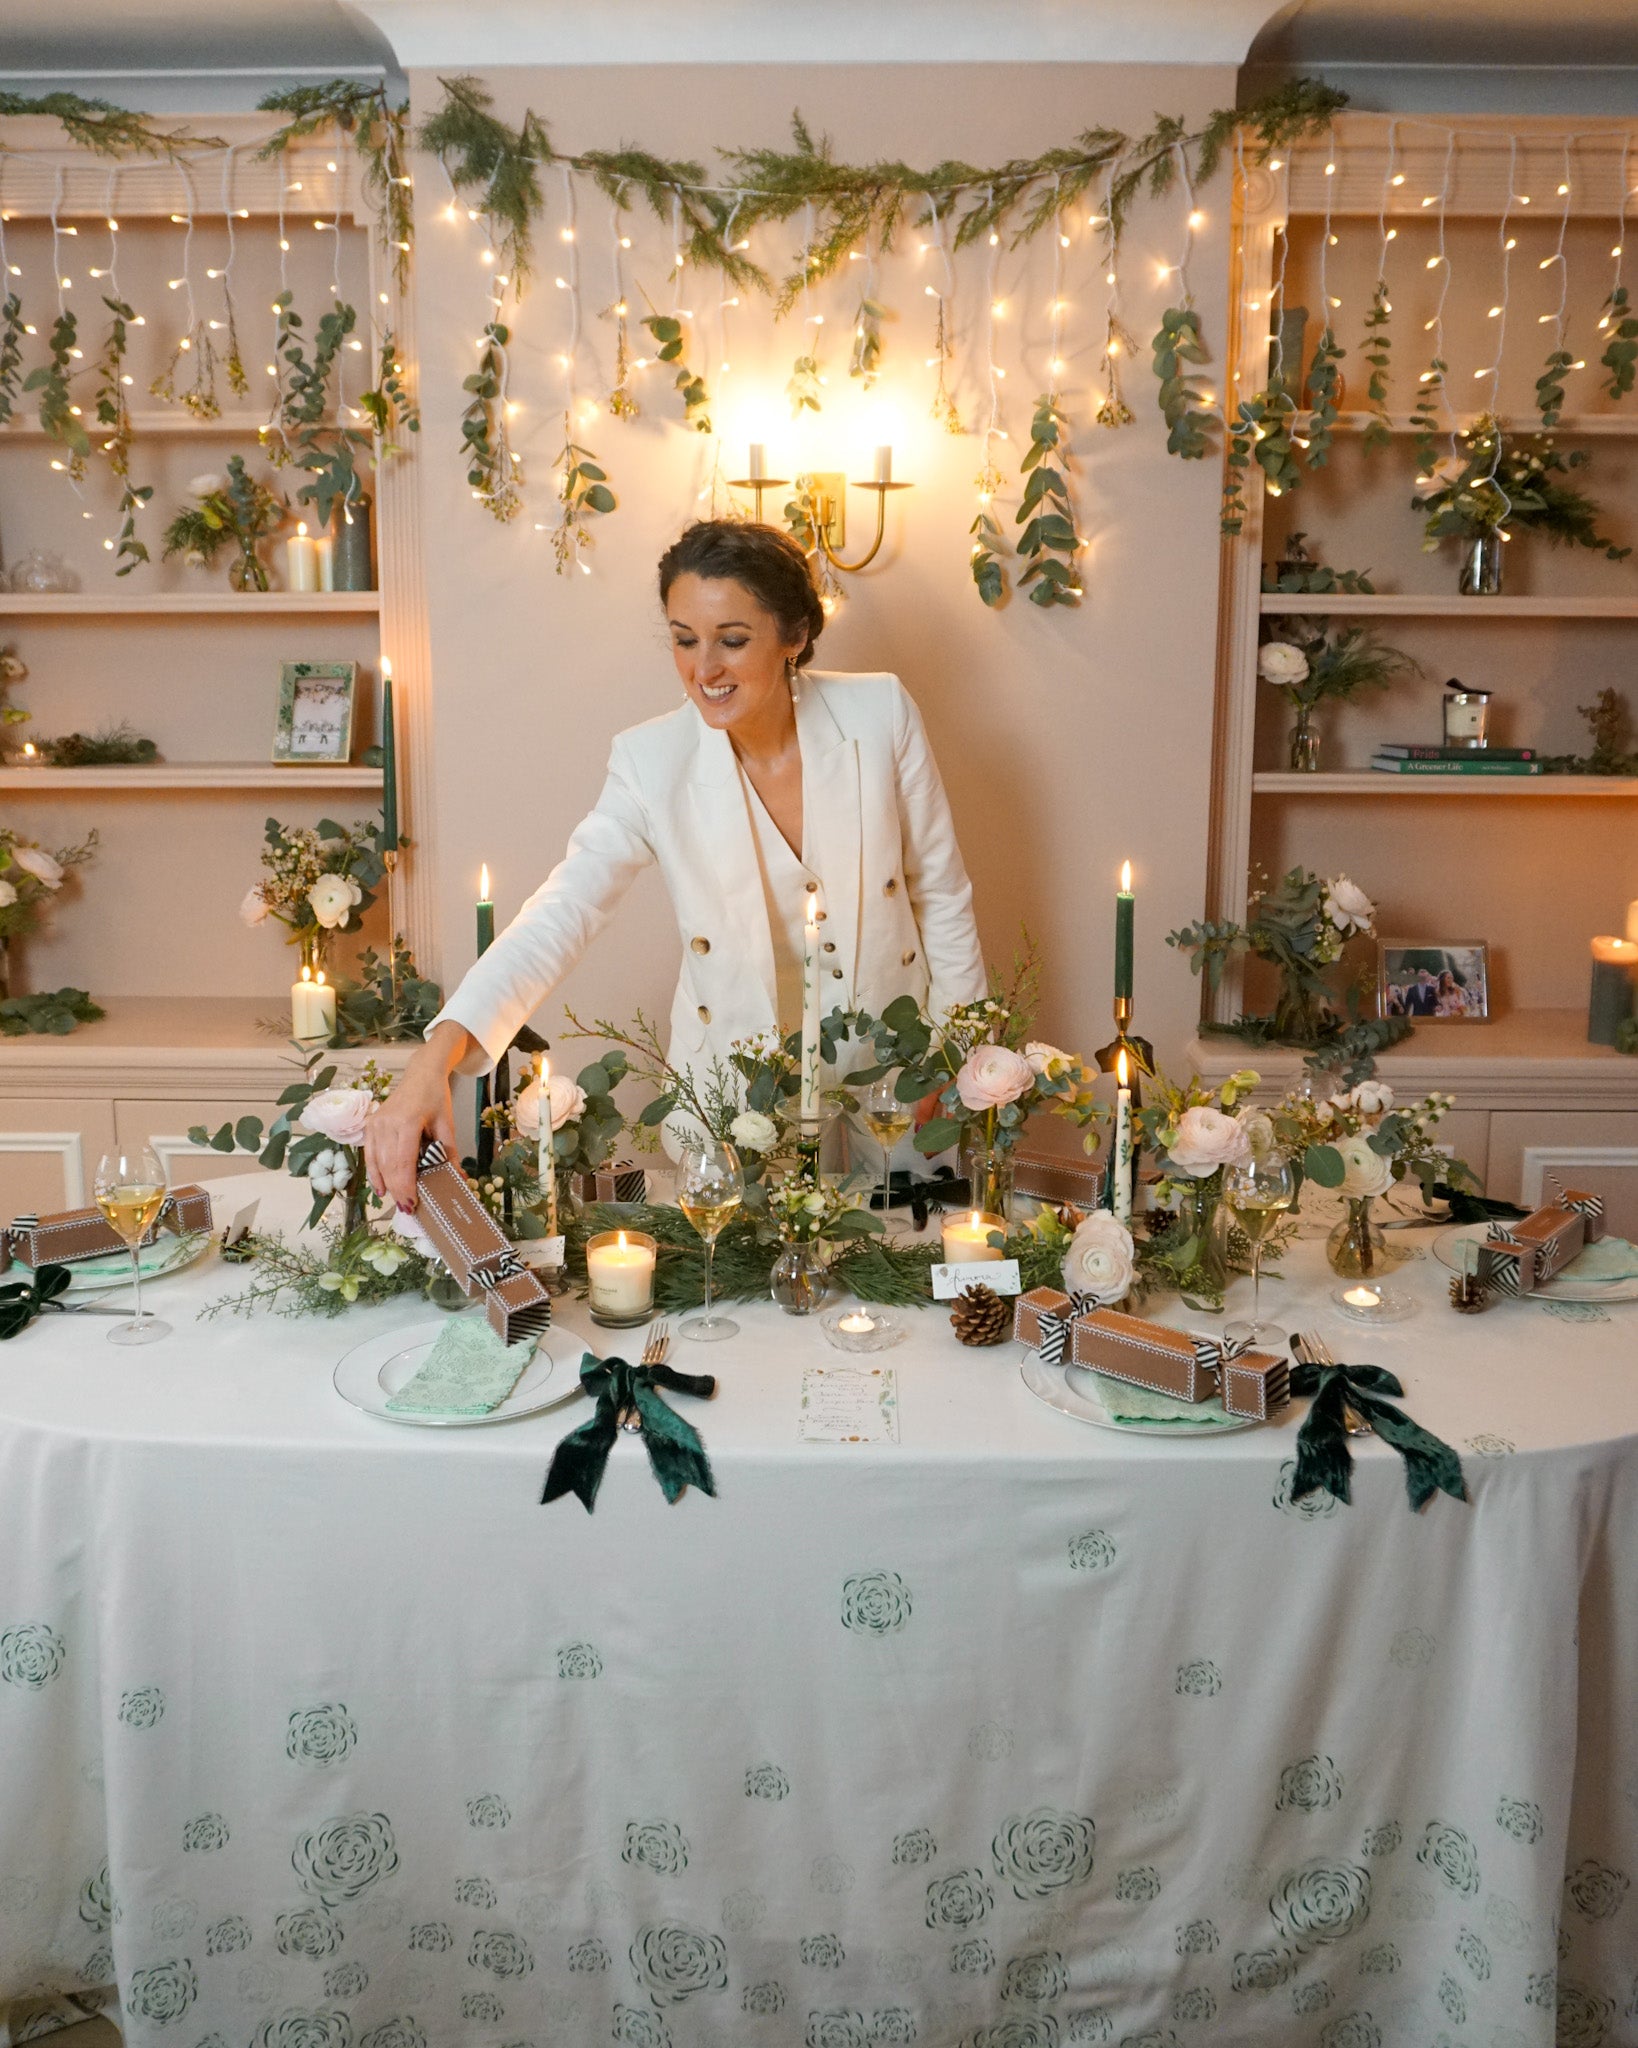 Rosanna in white suit putting cracker on winter festive tablescape